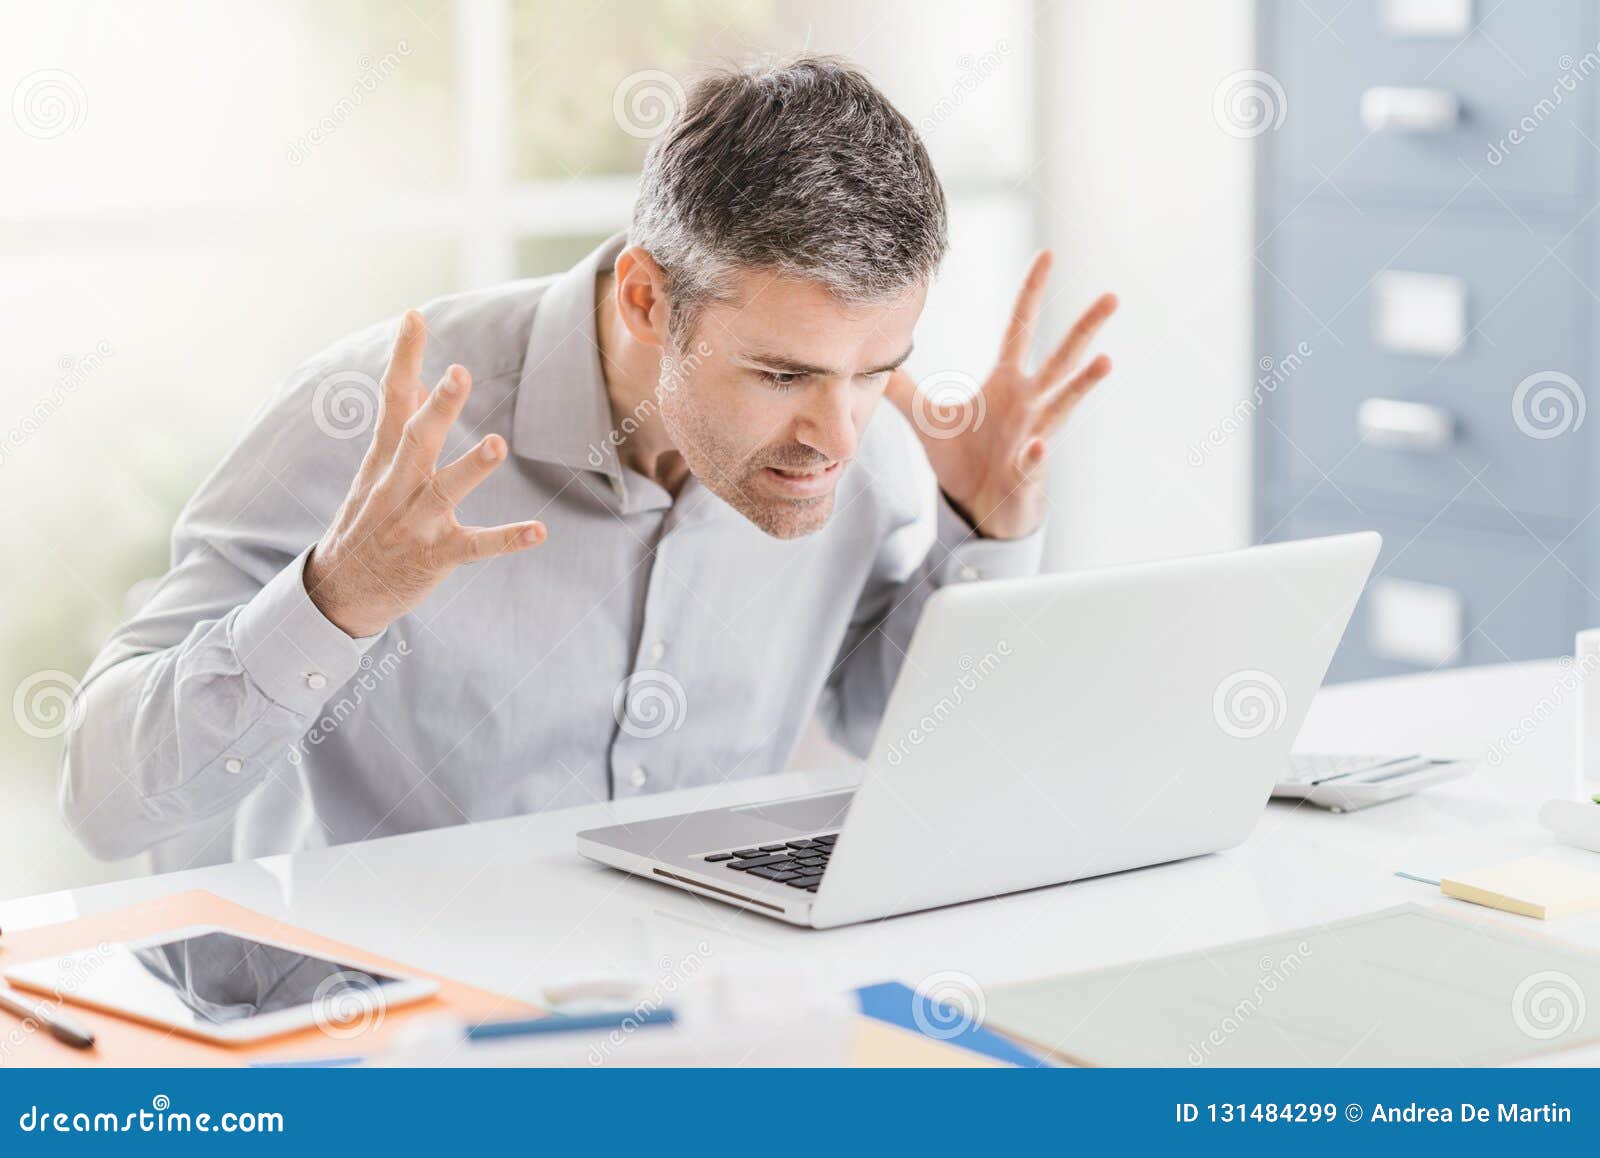 angry frustrated office worker having problems with his laptop and connection, computer problems and troubleshooting concept